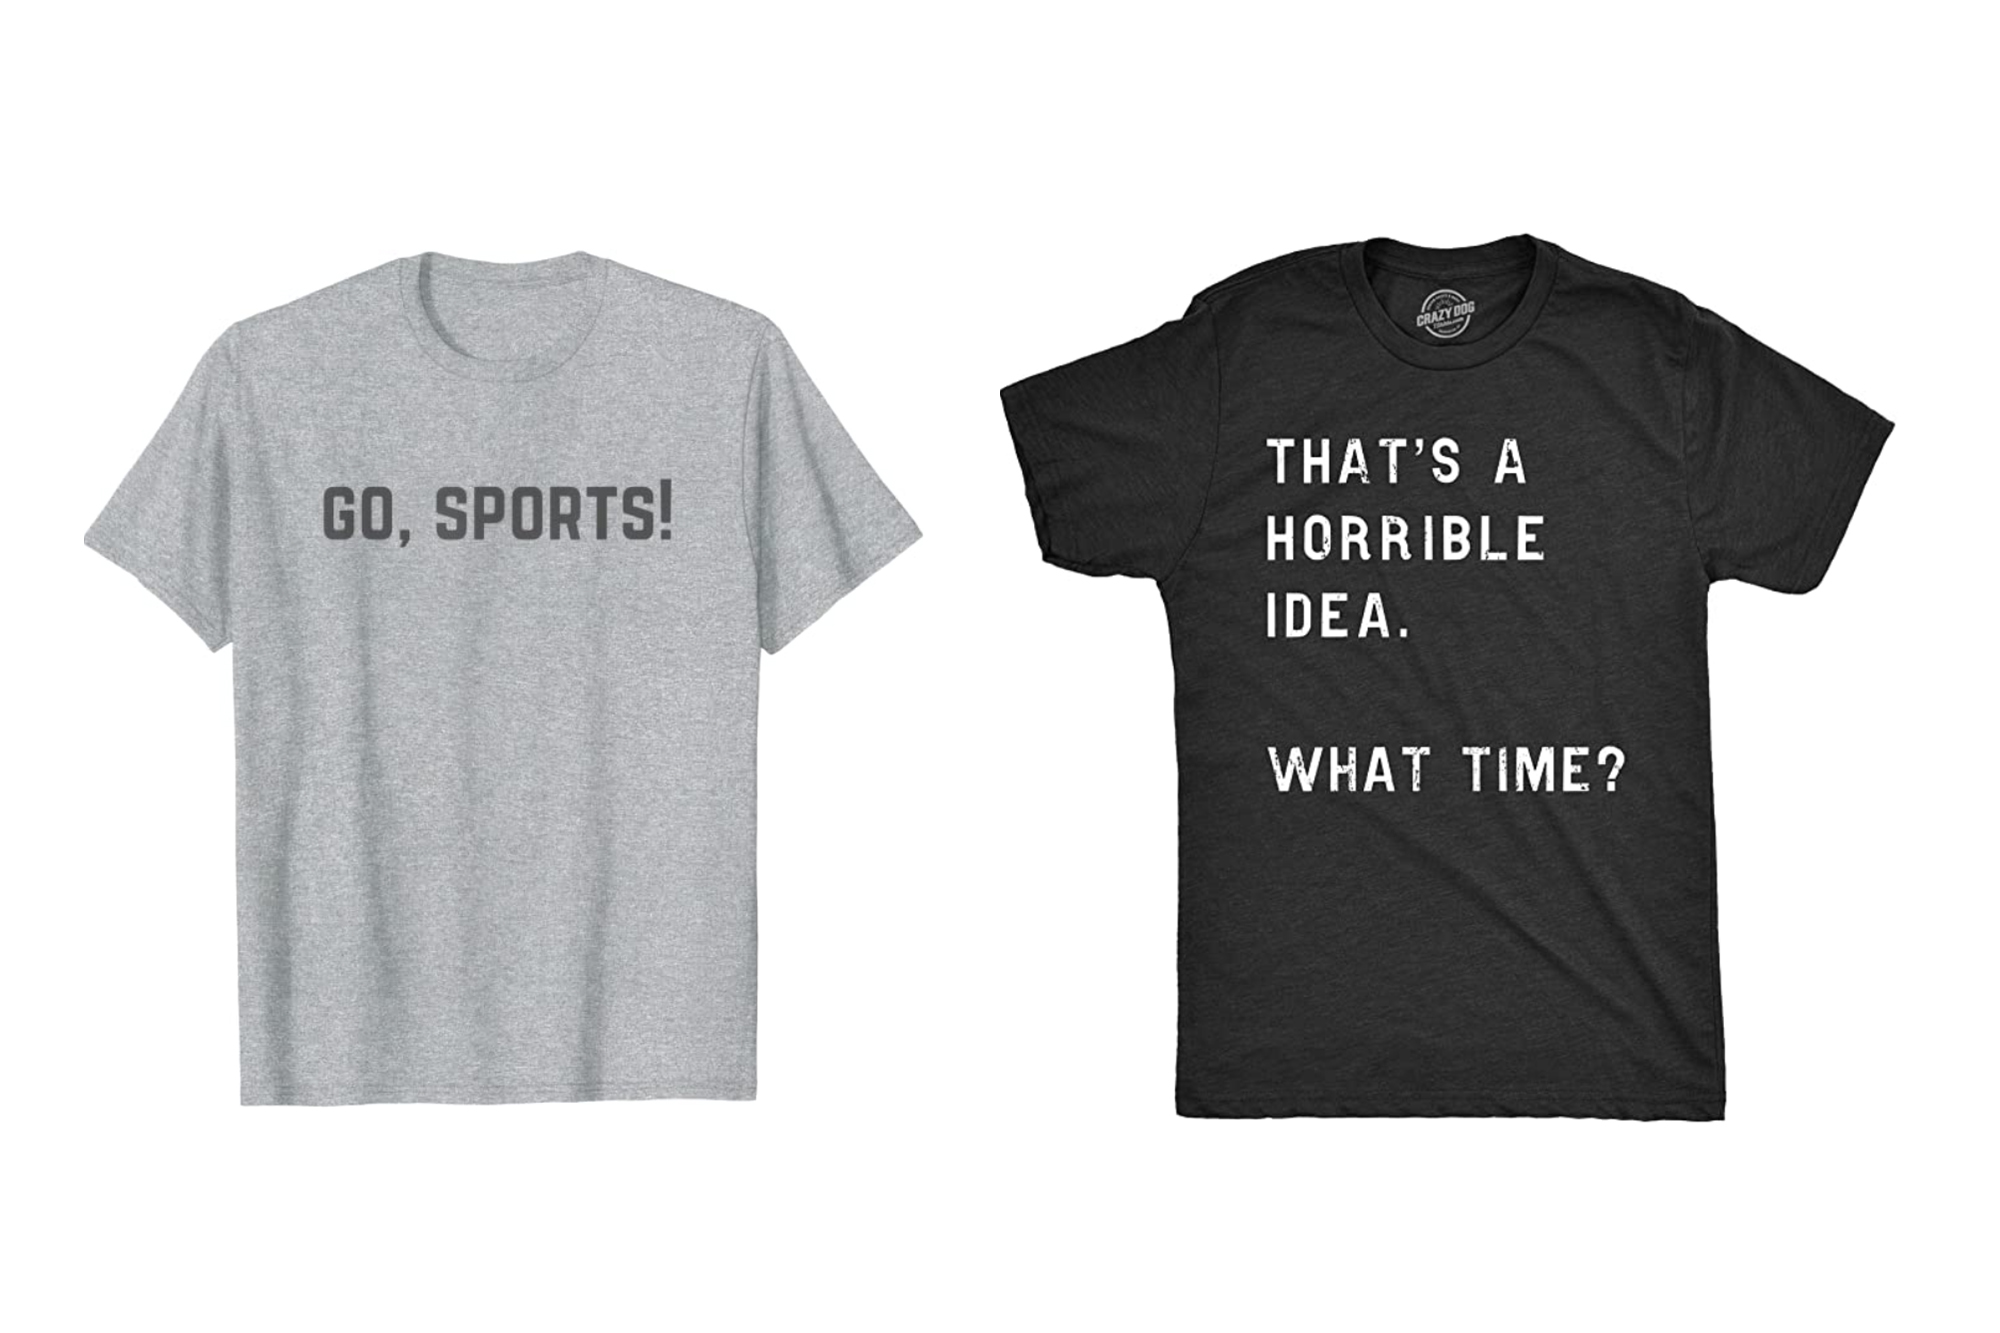 5 T-Shirts That Make Great Funny Holiday